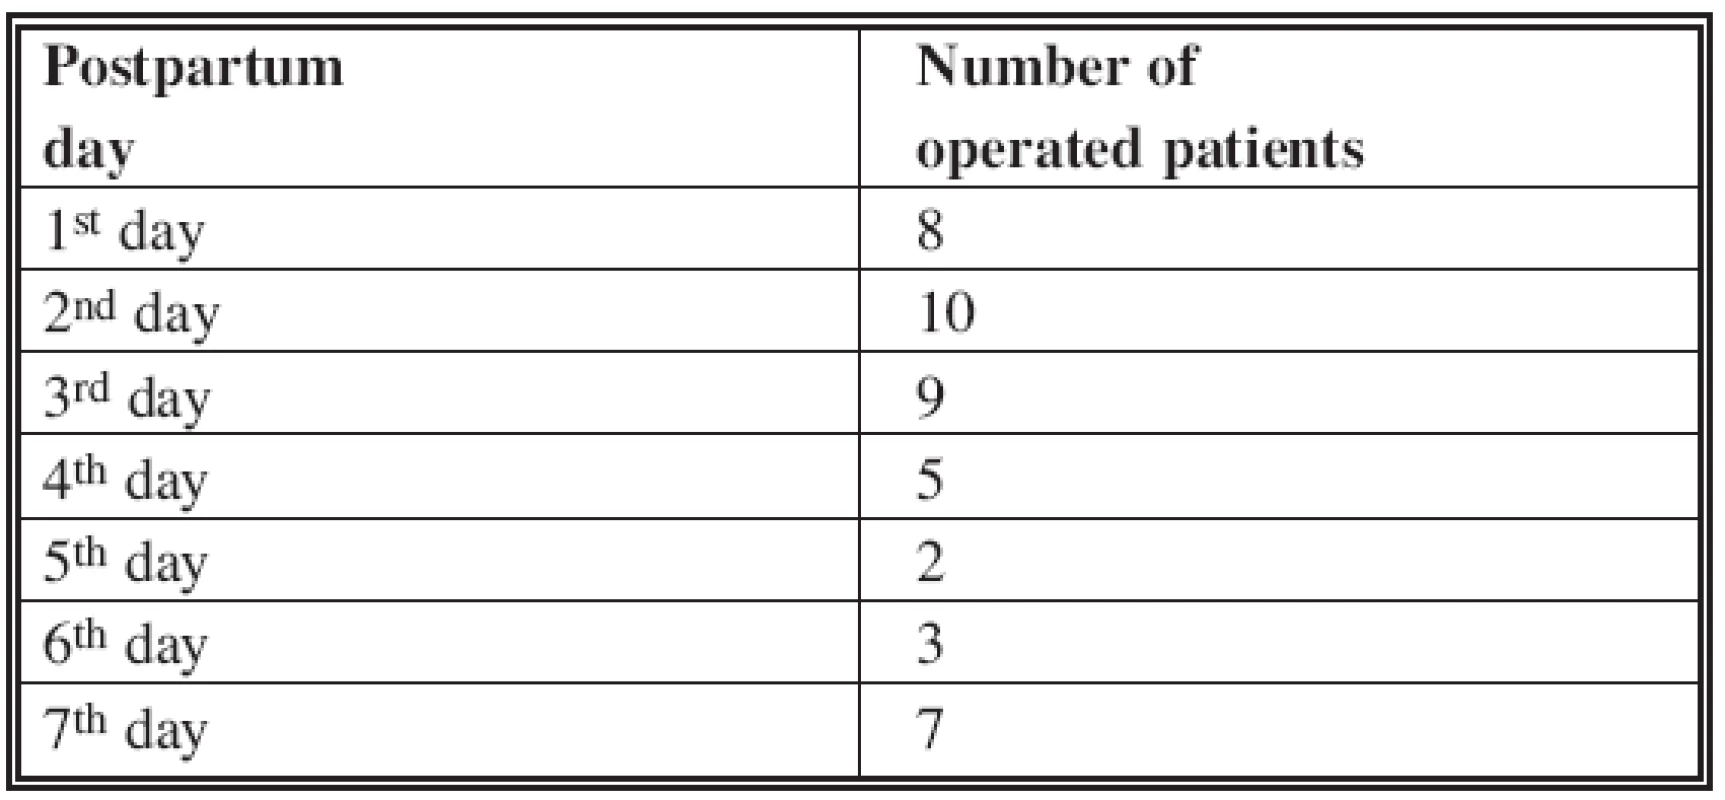 Frequency of operated patients in particular days after birth 